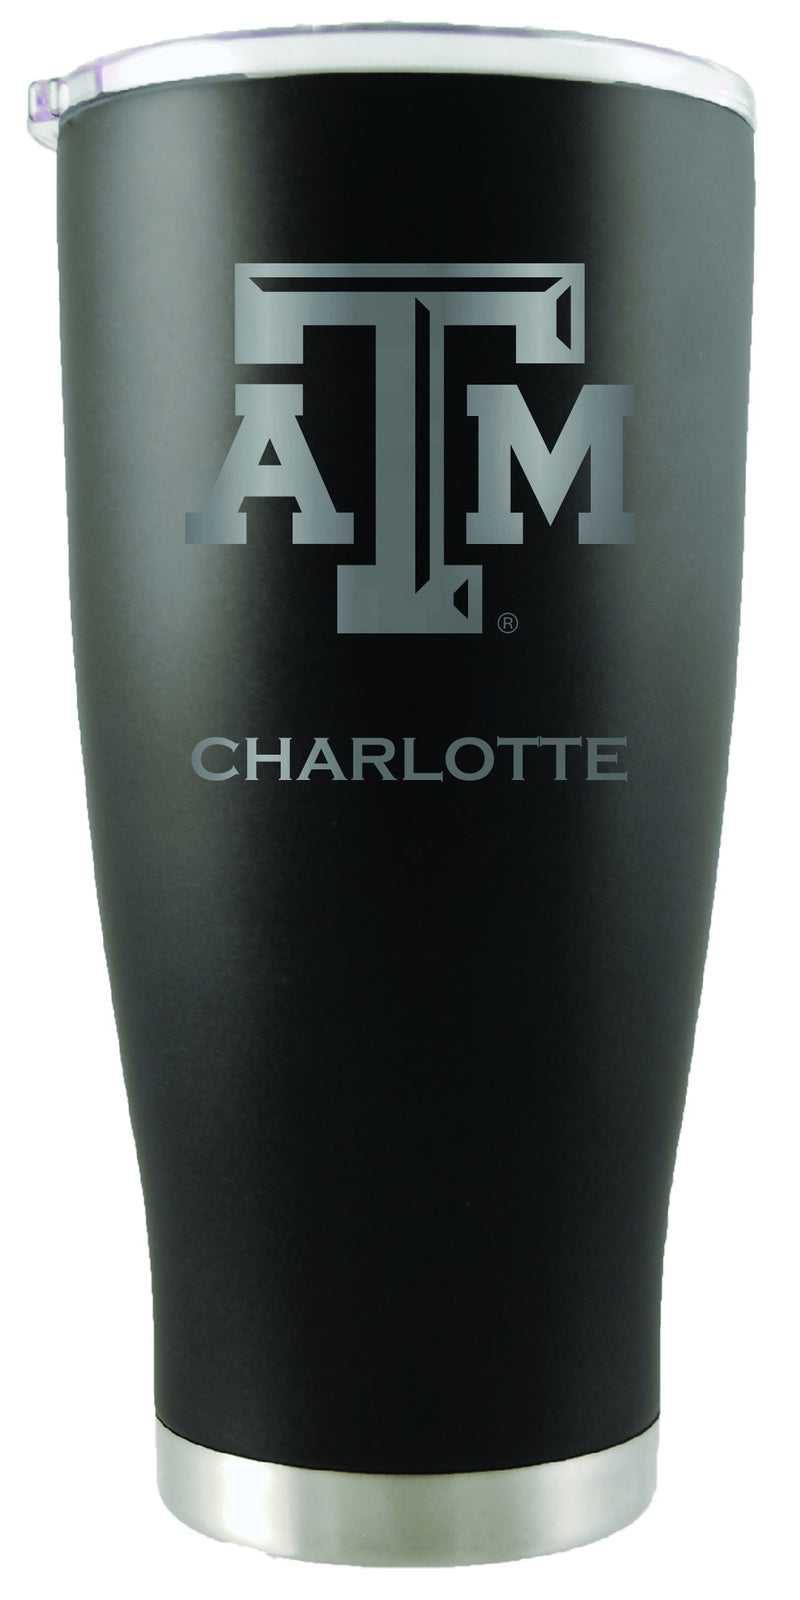 20oz Black Personalized Stainless Steel Tumbler | Texas A&M
COL, CurrentProduct, Drinkware_category_All, Personalized_Personalized, TAM, Texas A&M Aggies
The Memory Company